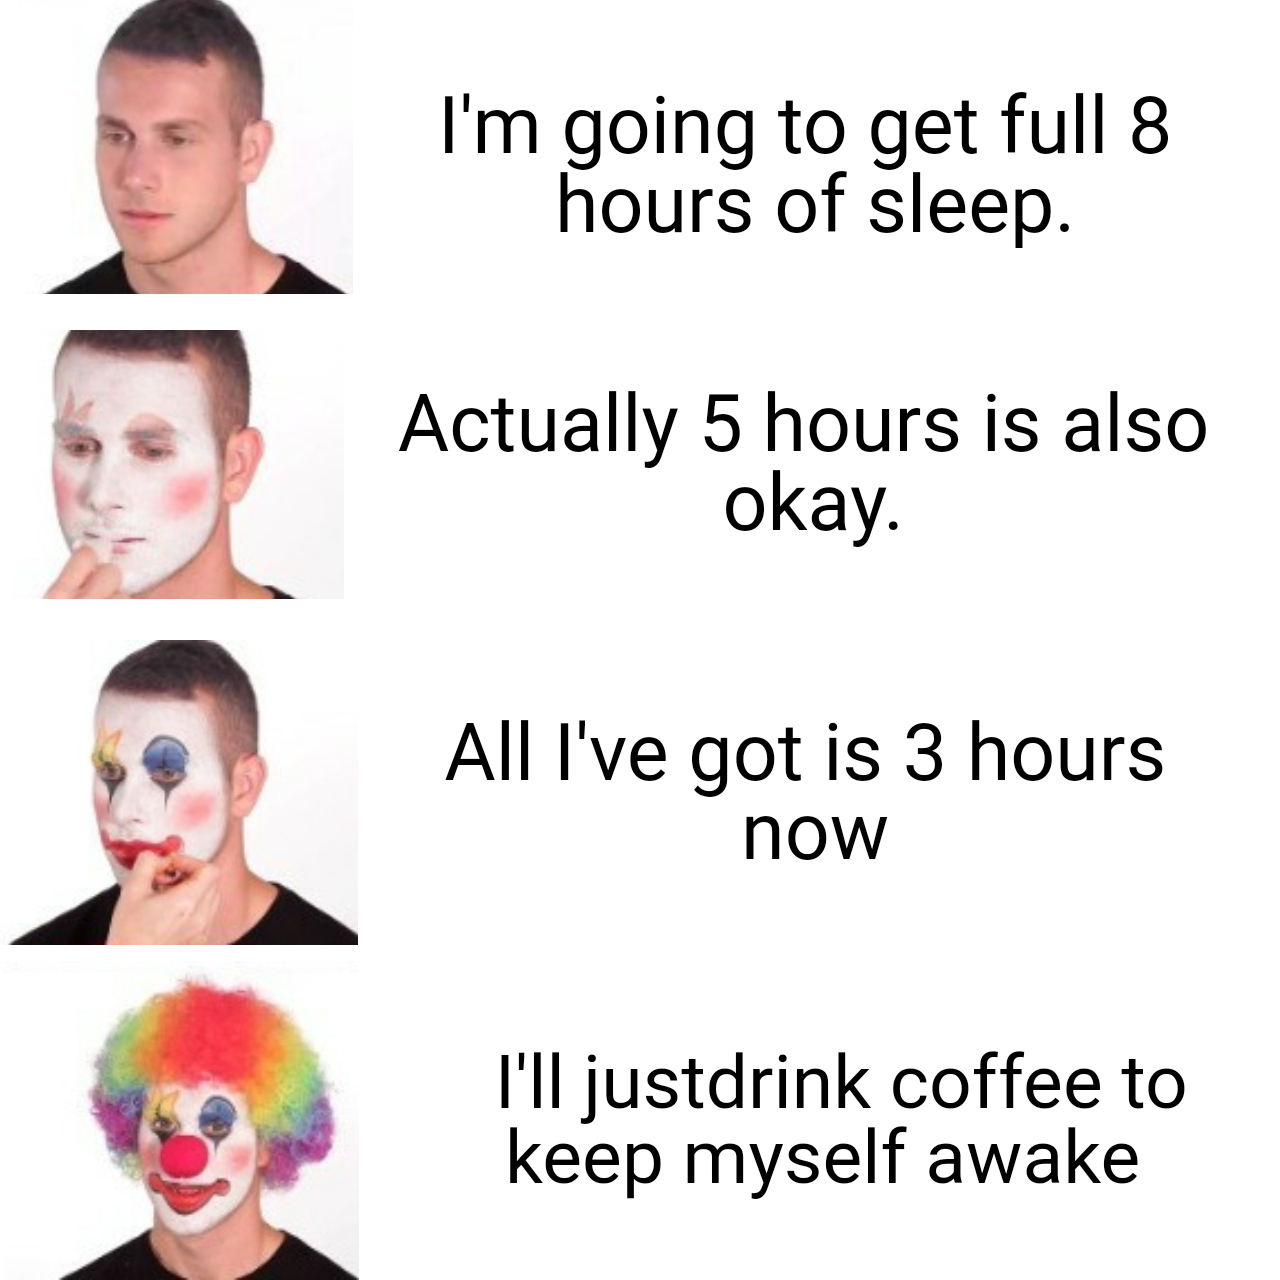 funny memes - dank memes - head - I'm going to get full 8 hours of sleep. Actually 5 hours is also okay. All I've got is 3 hours now I'll justdrink coffee to keep myself awake